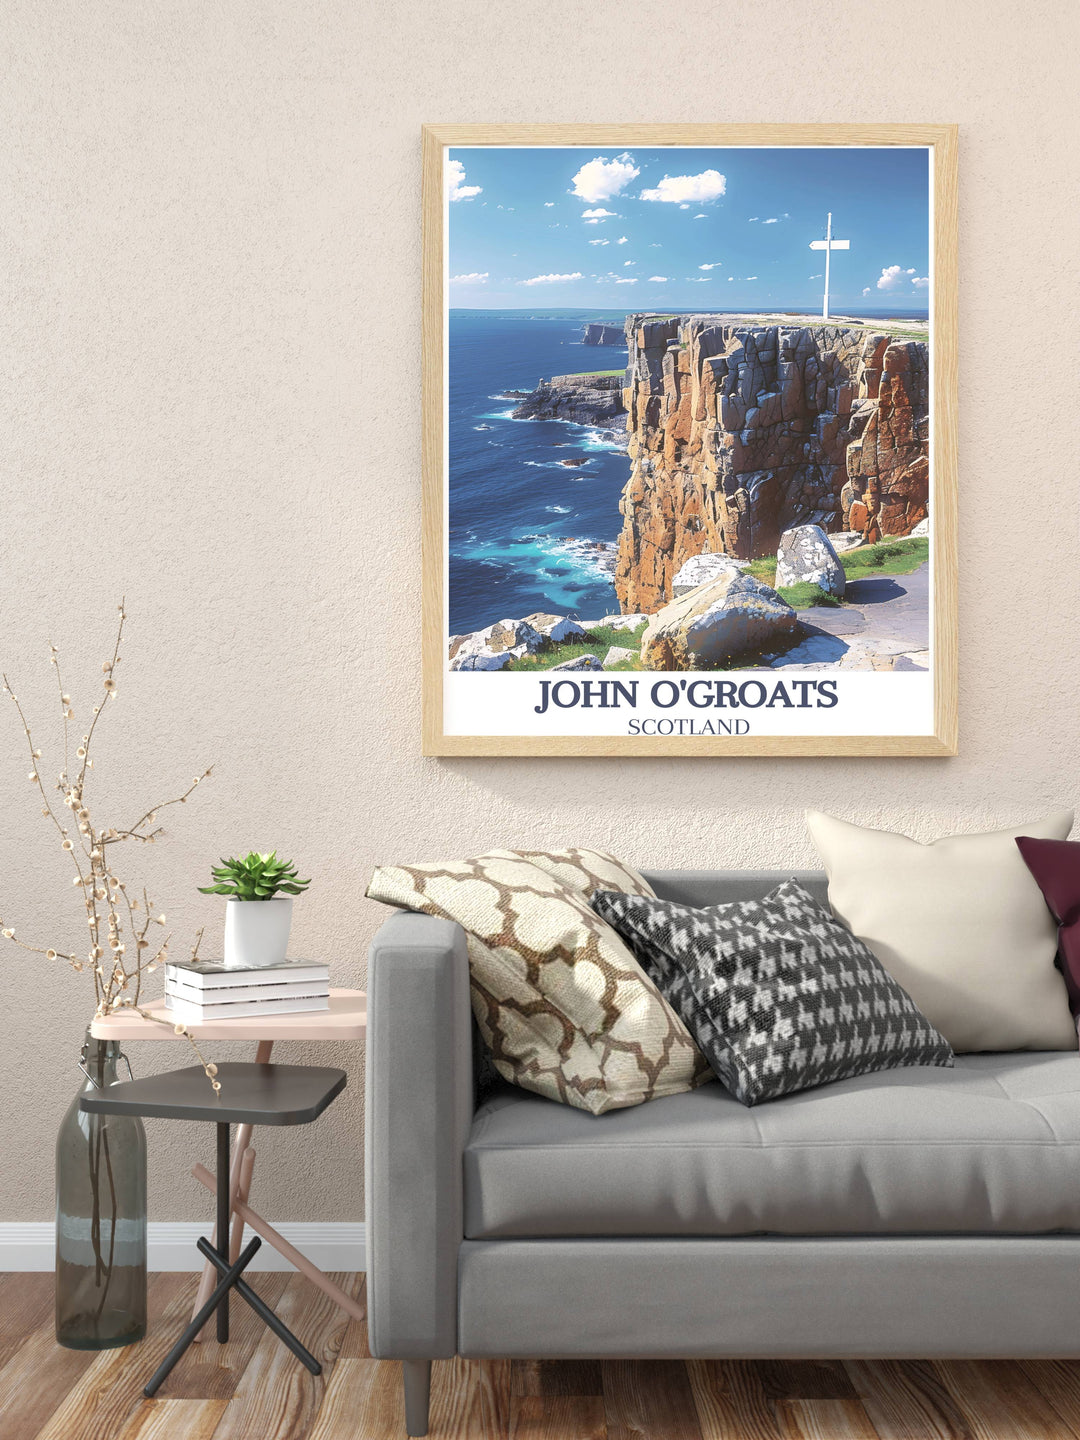 Cycling poster featuring the Lands End Signpost a symbol of endurance and adventure. Celebrate the iconic End to End Bike Ride with this captivating artwork perfect for home decor and cycling gifts